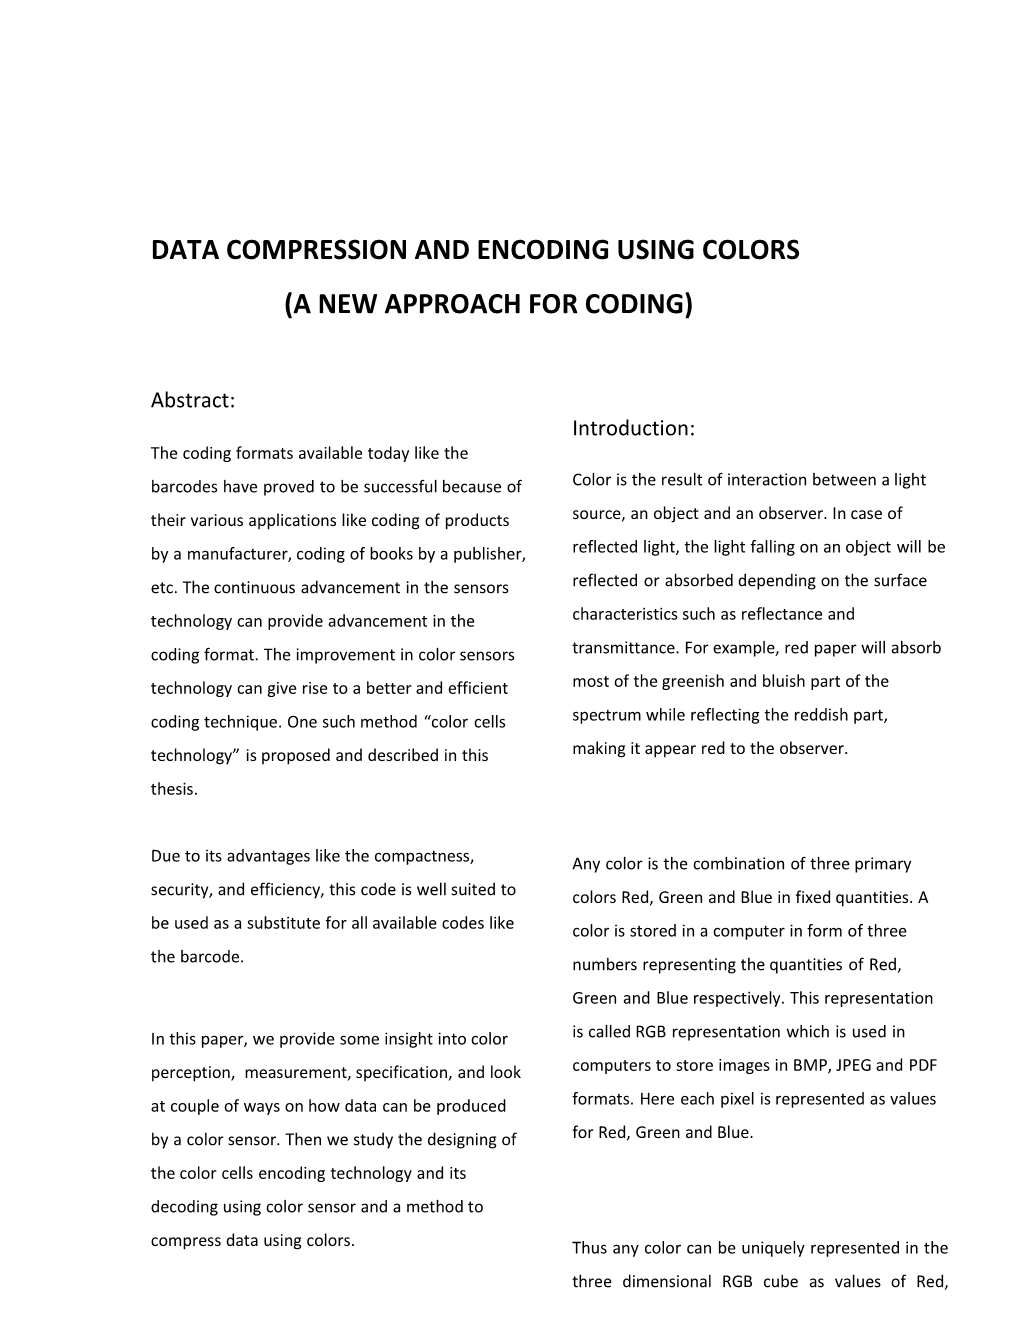 Data Compression and Encoding Using Colors